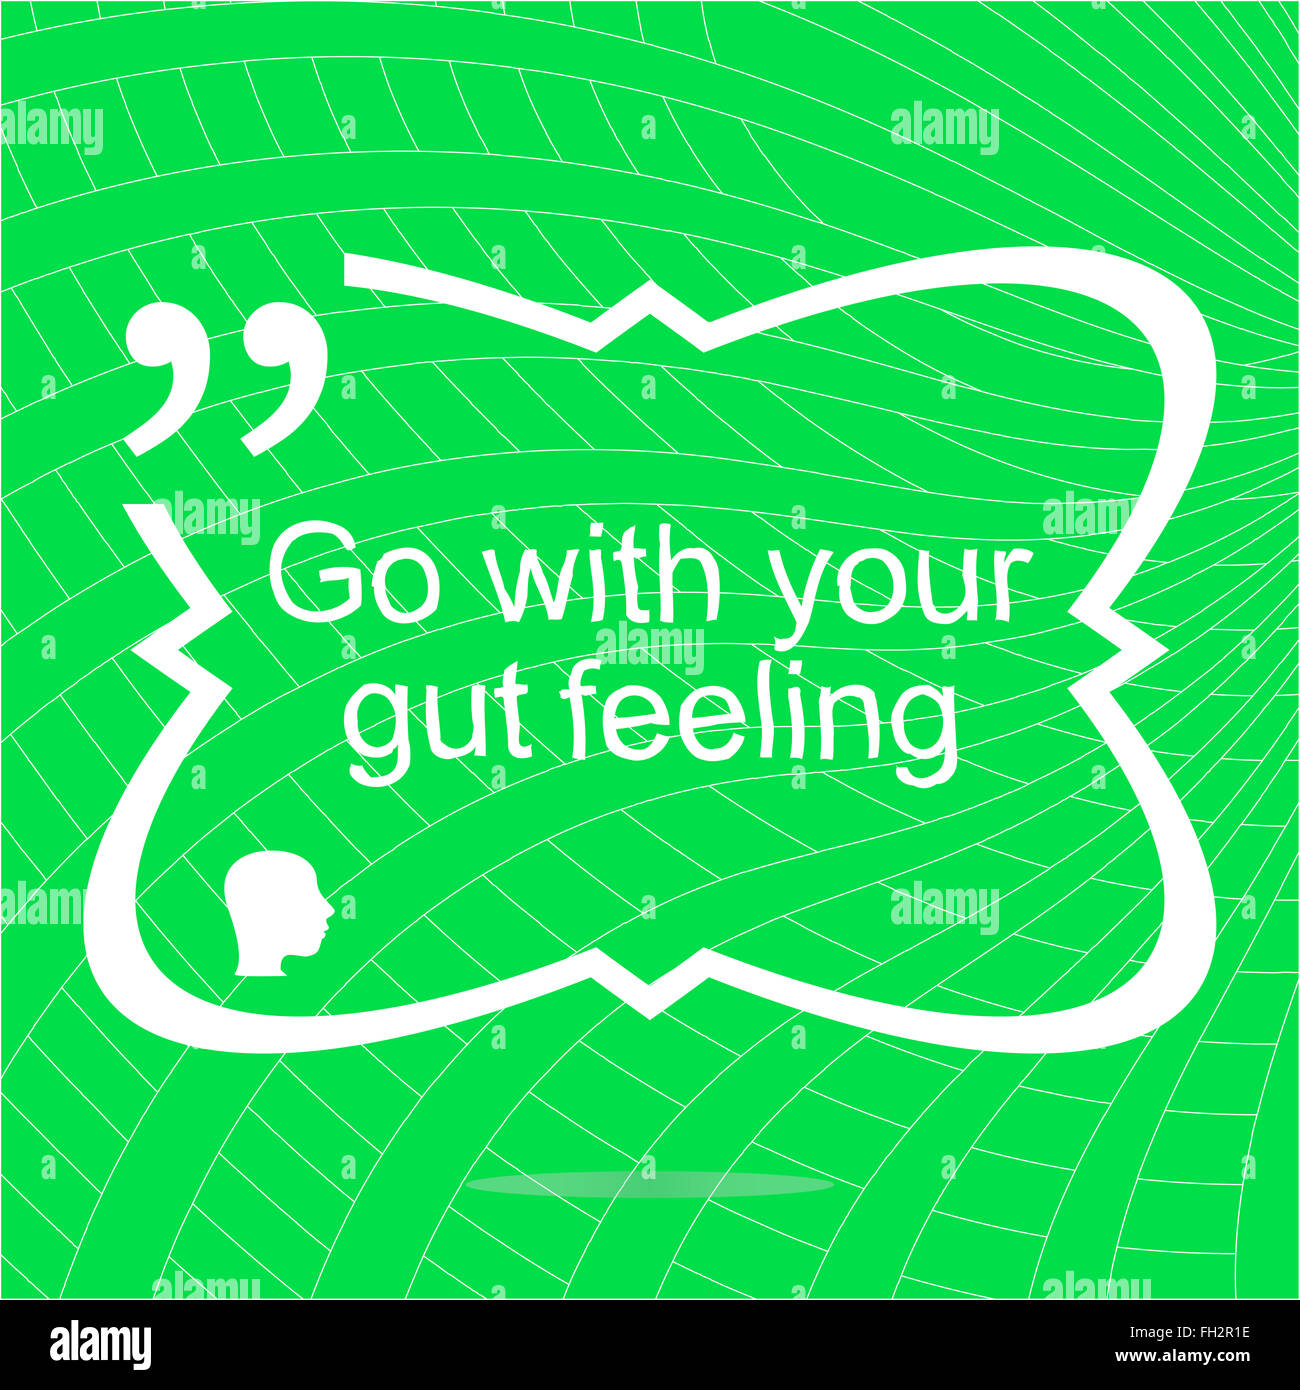 Go with your gut feeling. Inspirational motivational quote. Simple trendy design. Positive quote Stock Photo